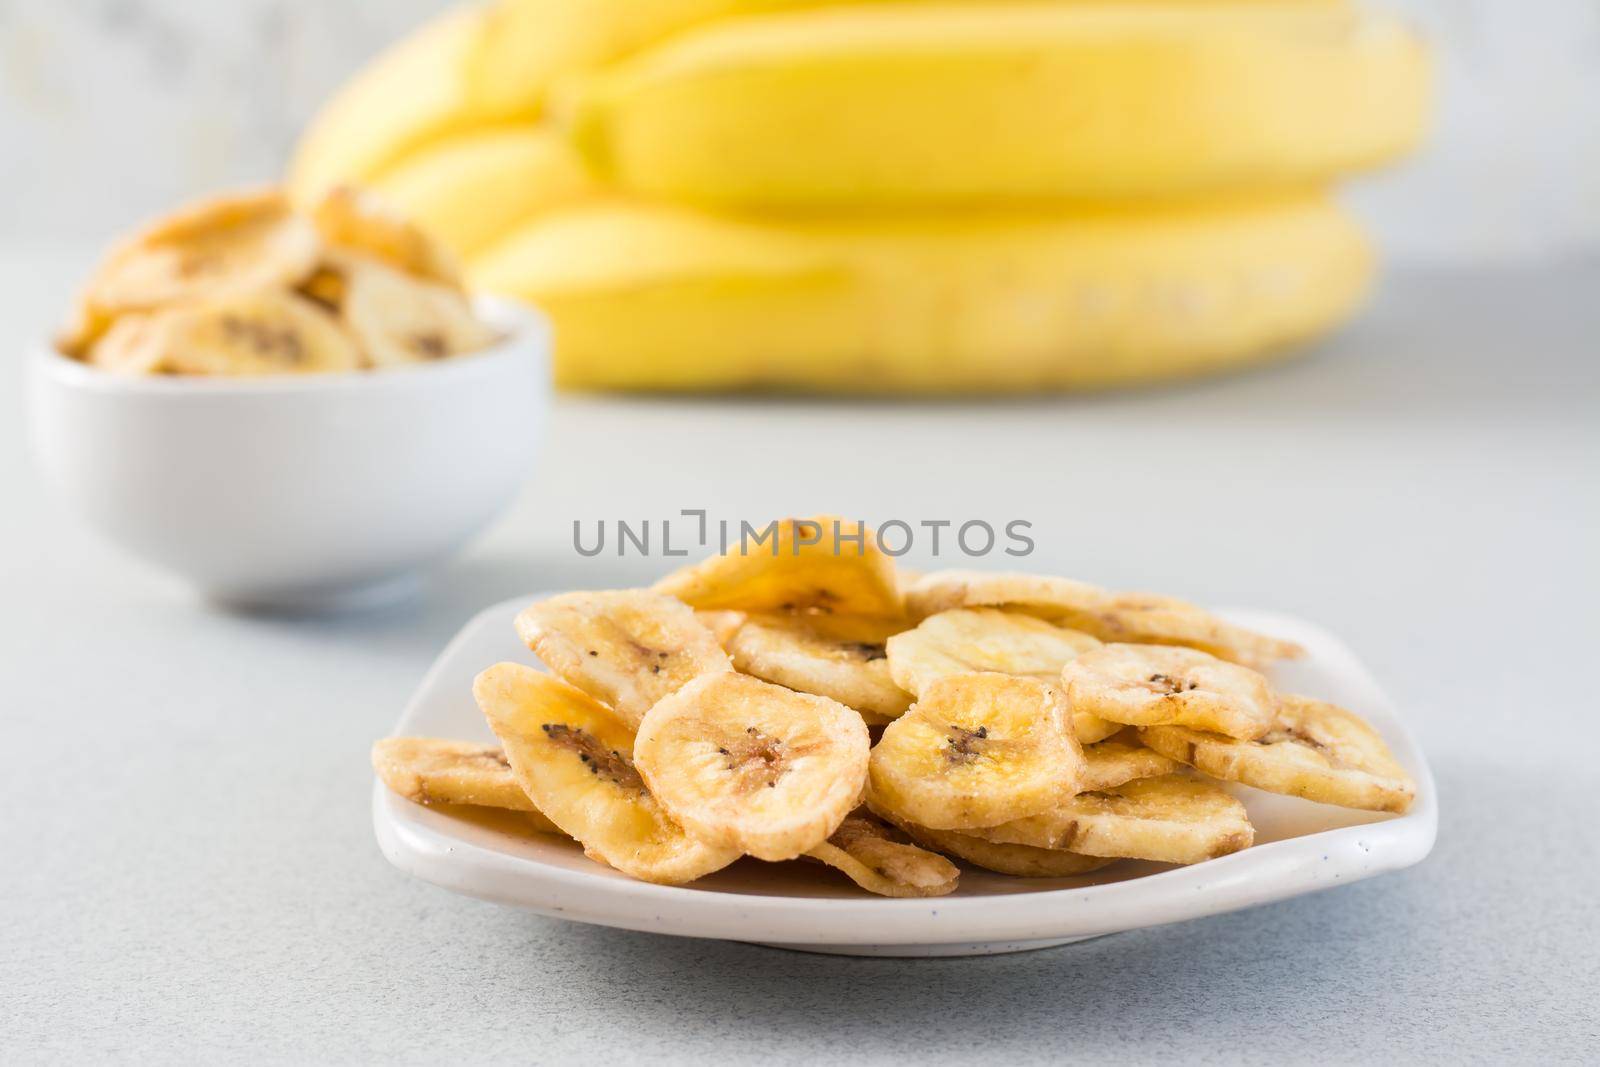 Baked banana chips in a white bowl and saucer and a bunch of bananas on the table. Fast food.